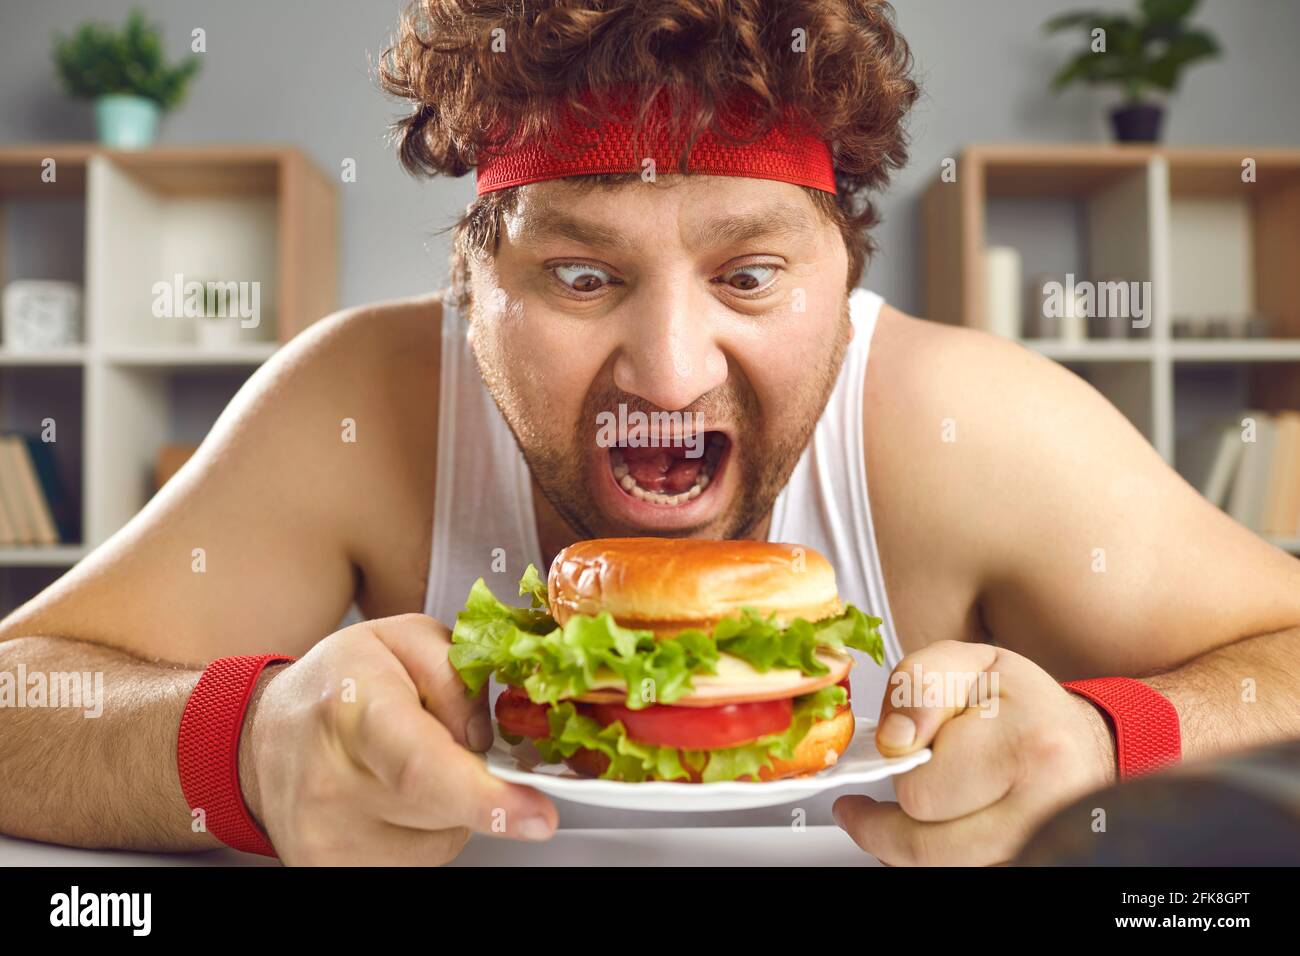 Hungry crazy chubby man in sportswear eating fast food hamburger portrait Stock Photo